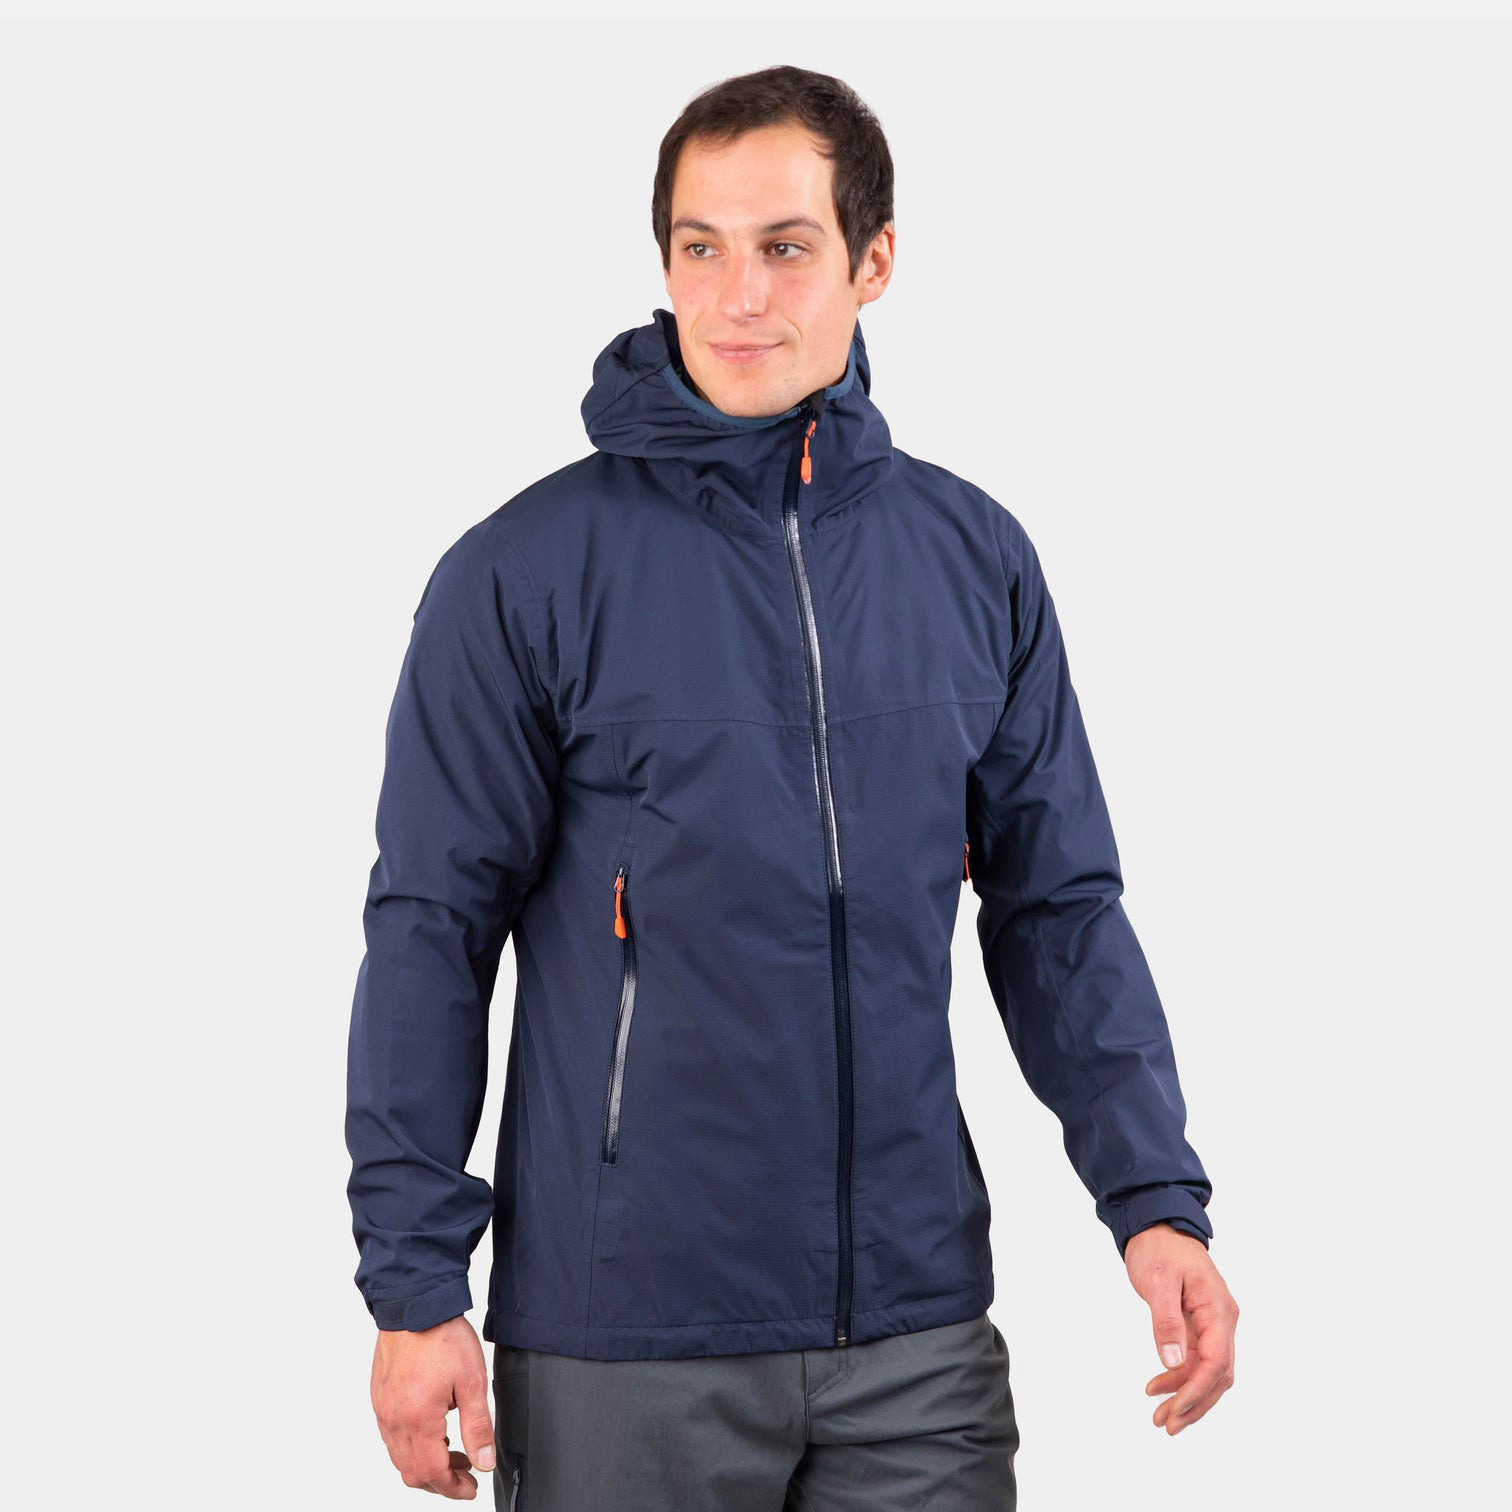 New Style for all seasons Men’s Multi Activity 3-layer Waterproof jacket